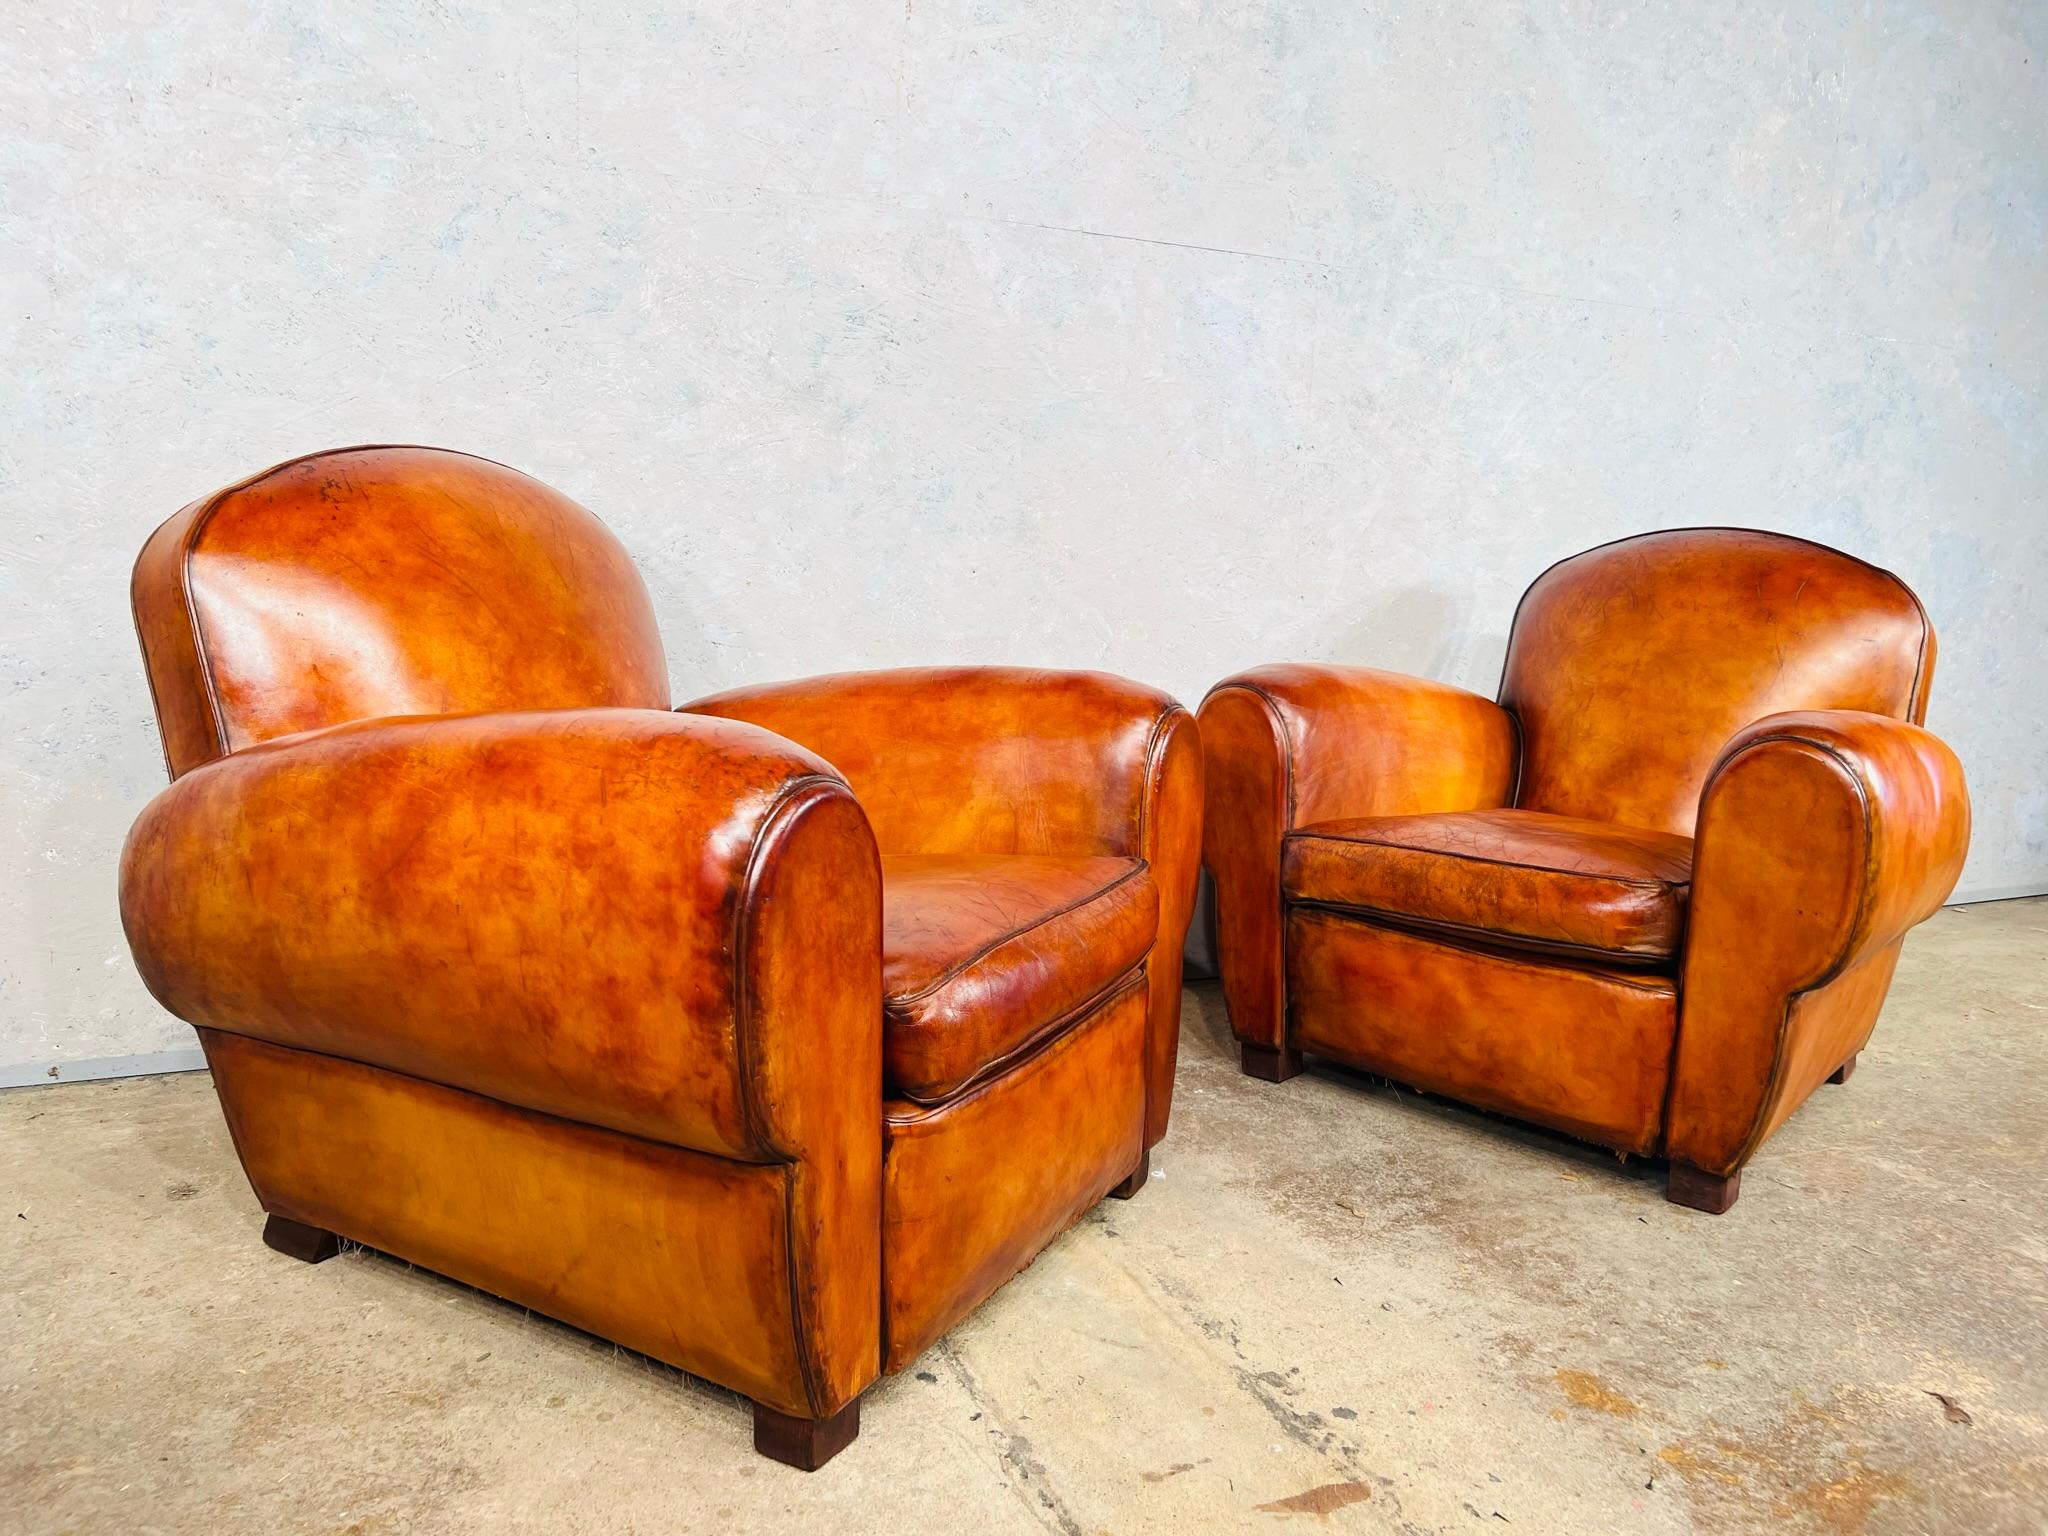 20th Century Stunning Pair of Leather French Club Chairs circa 1930 Patinated Cognac Color For Sale